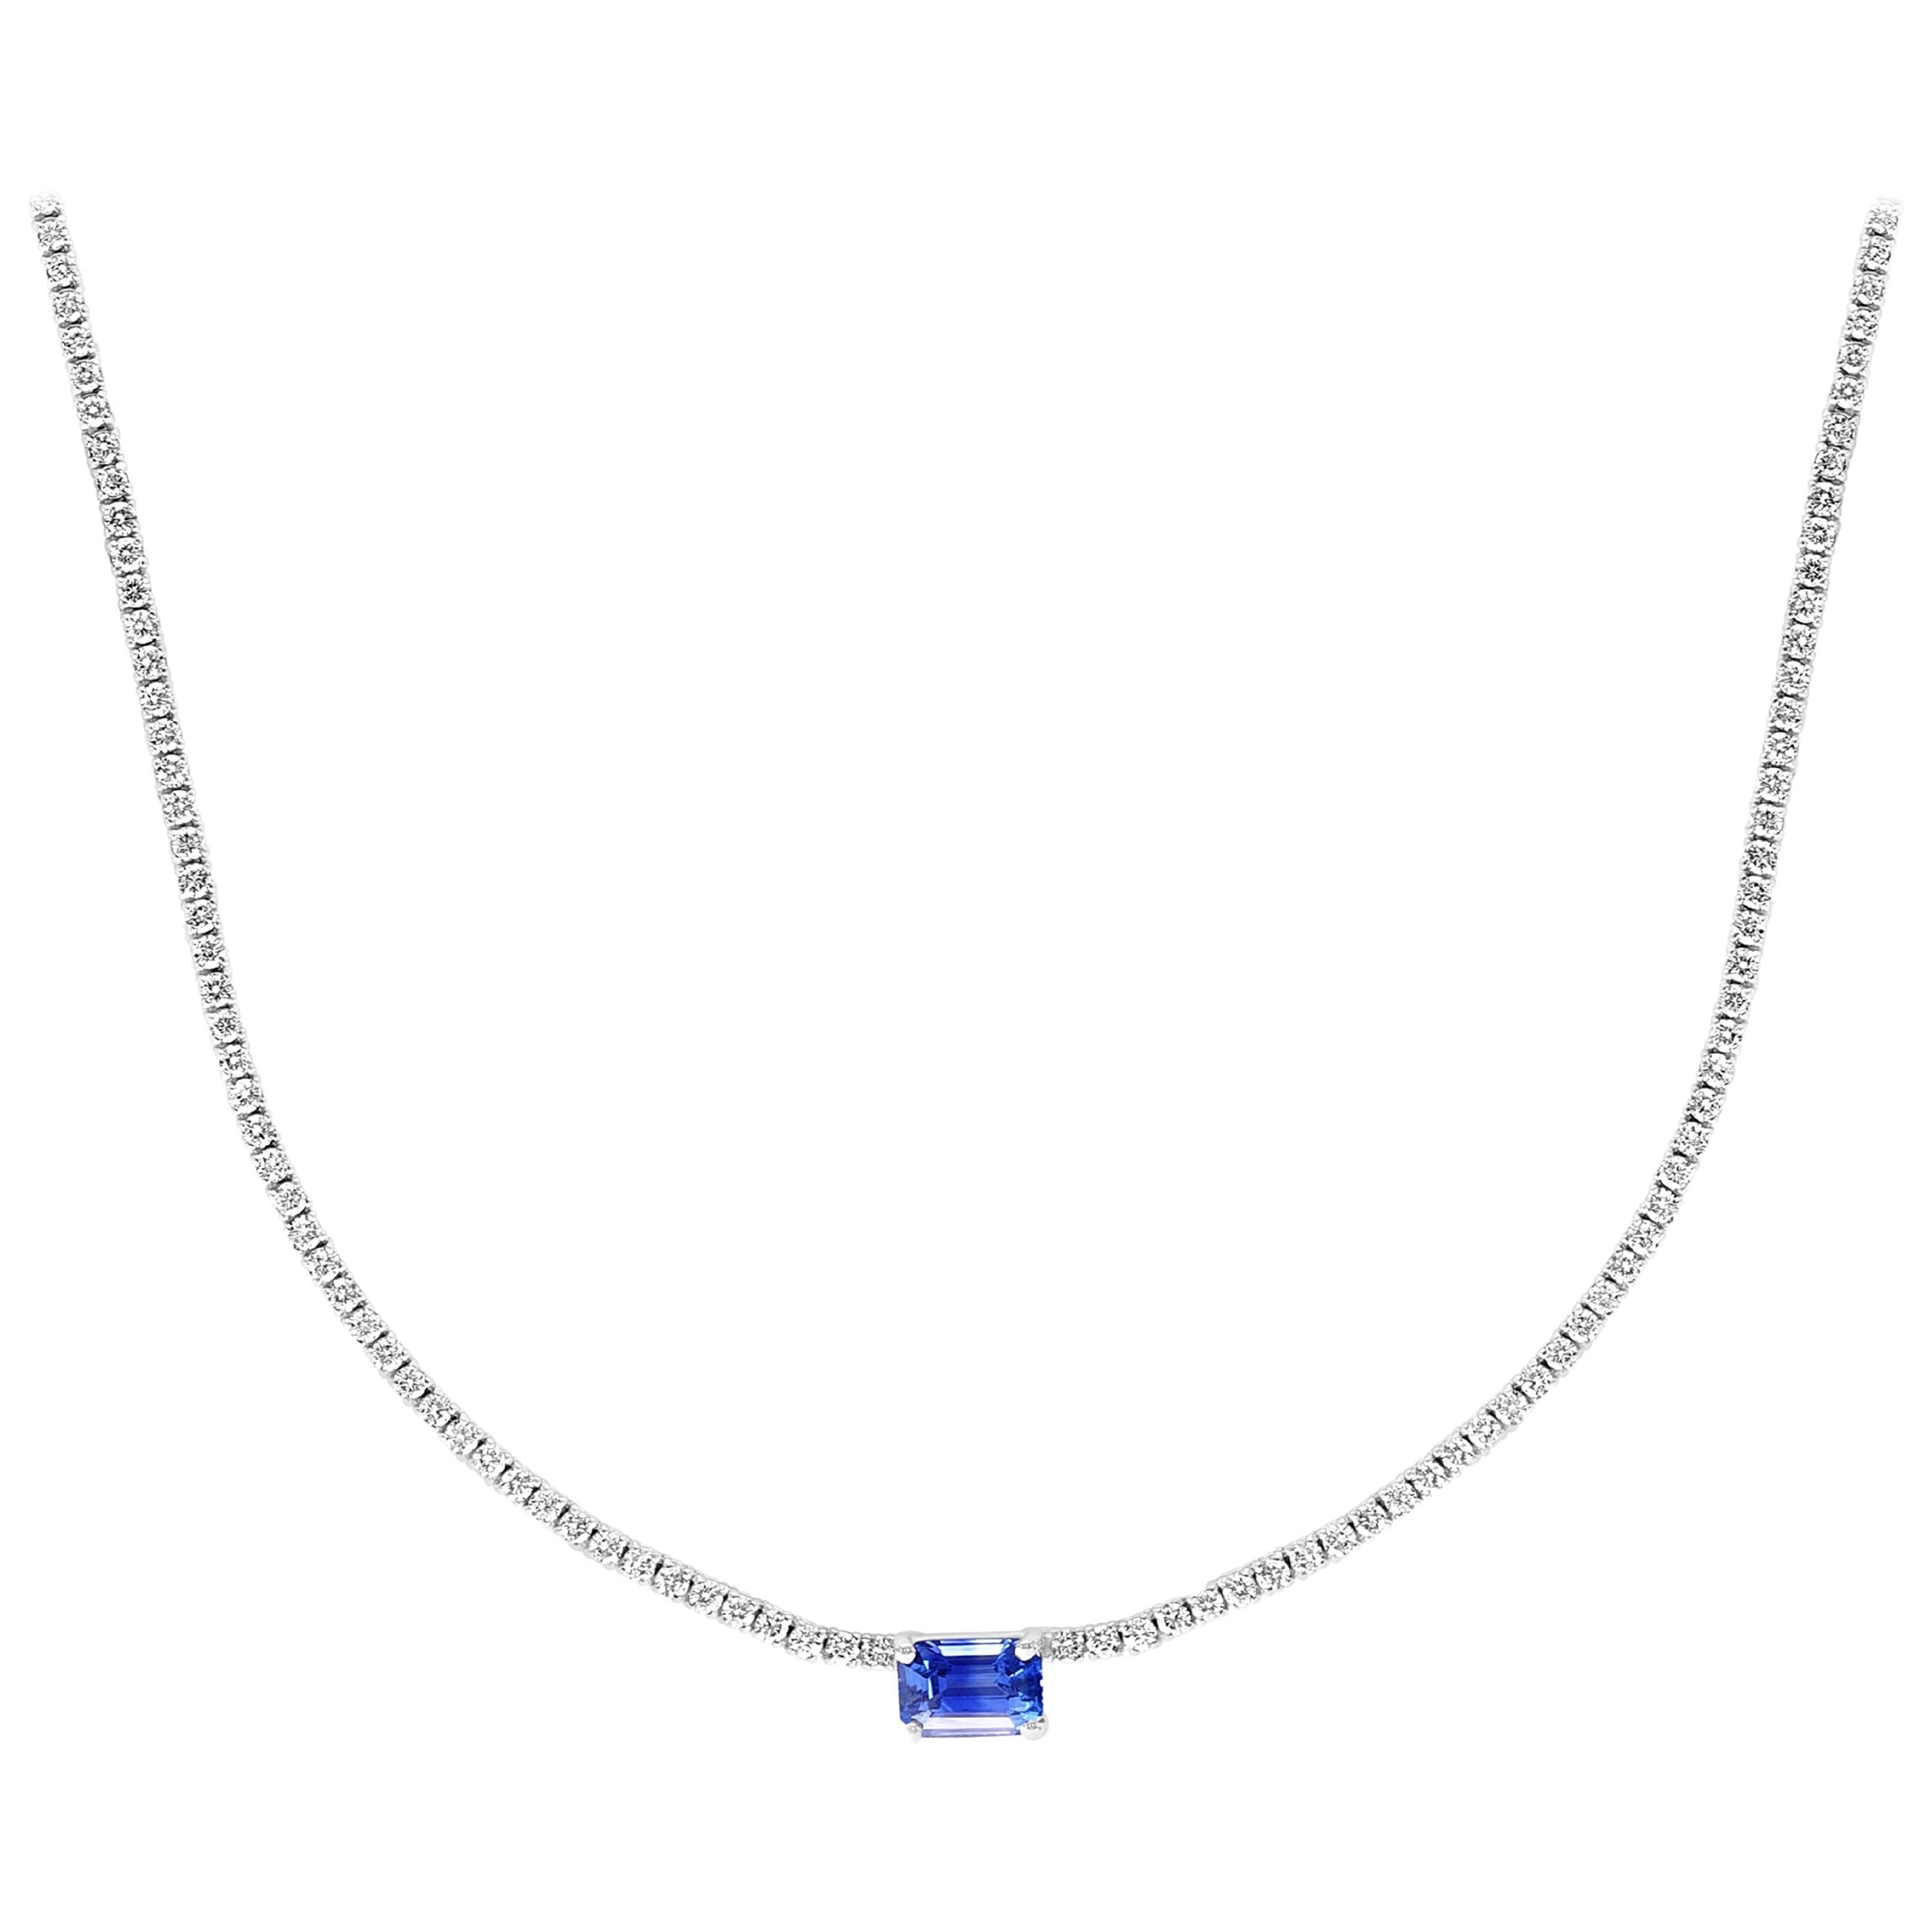 1.49 Carat Emerald cut Sapphire and Diamond Tennis Necklace in 14K White Gold